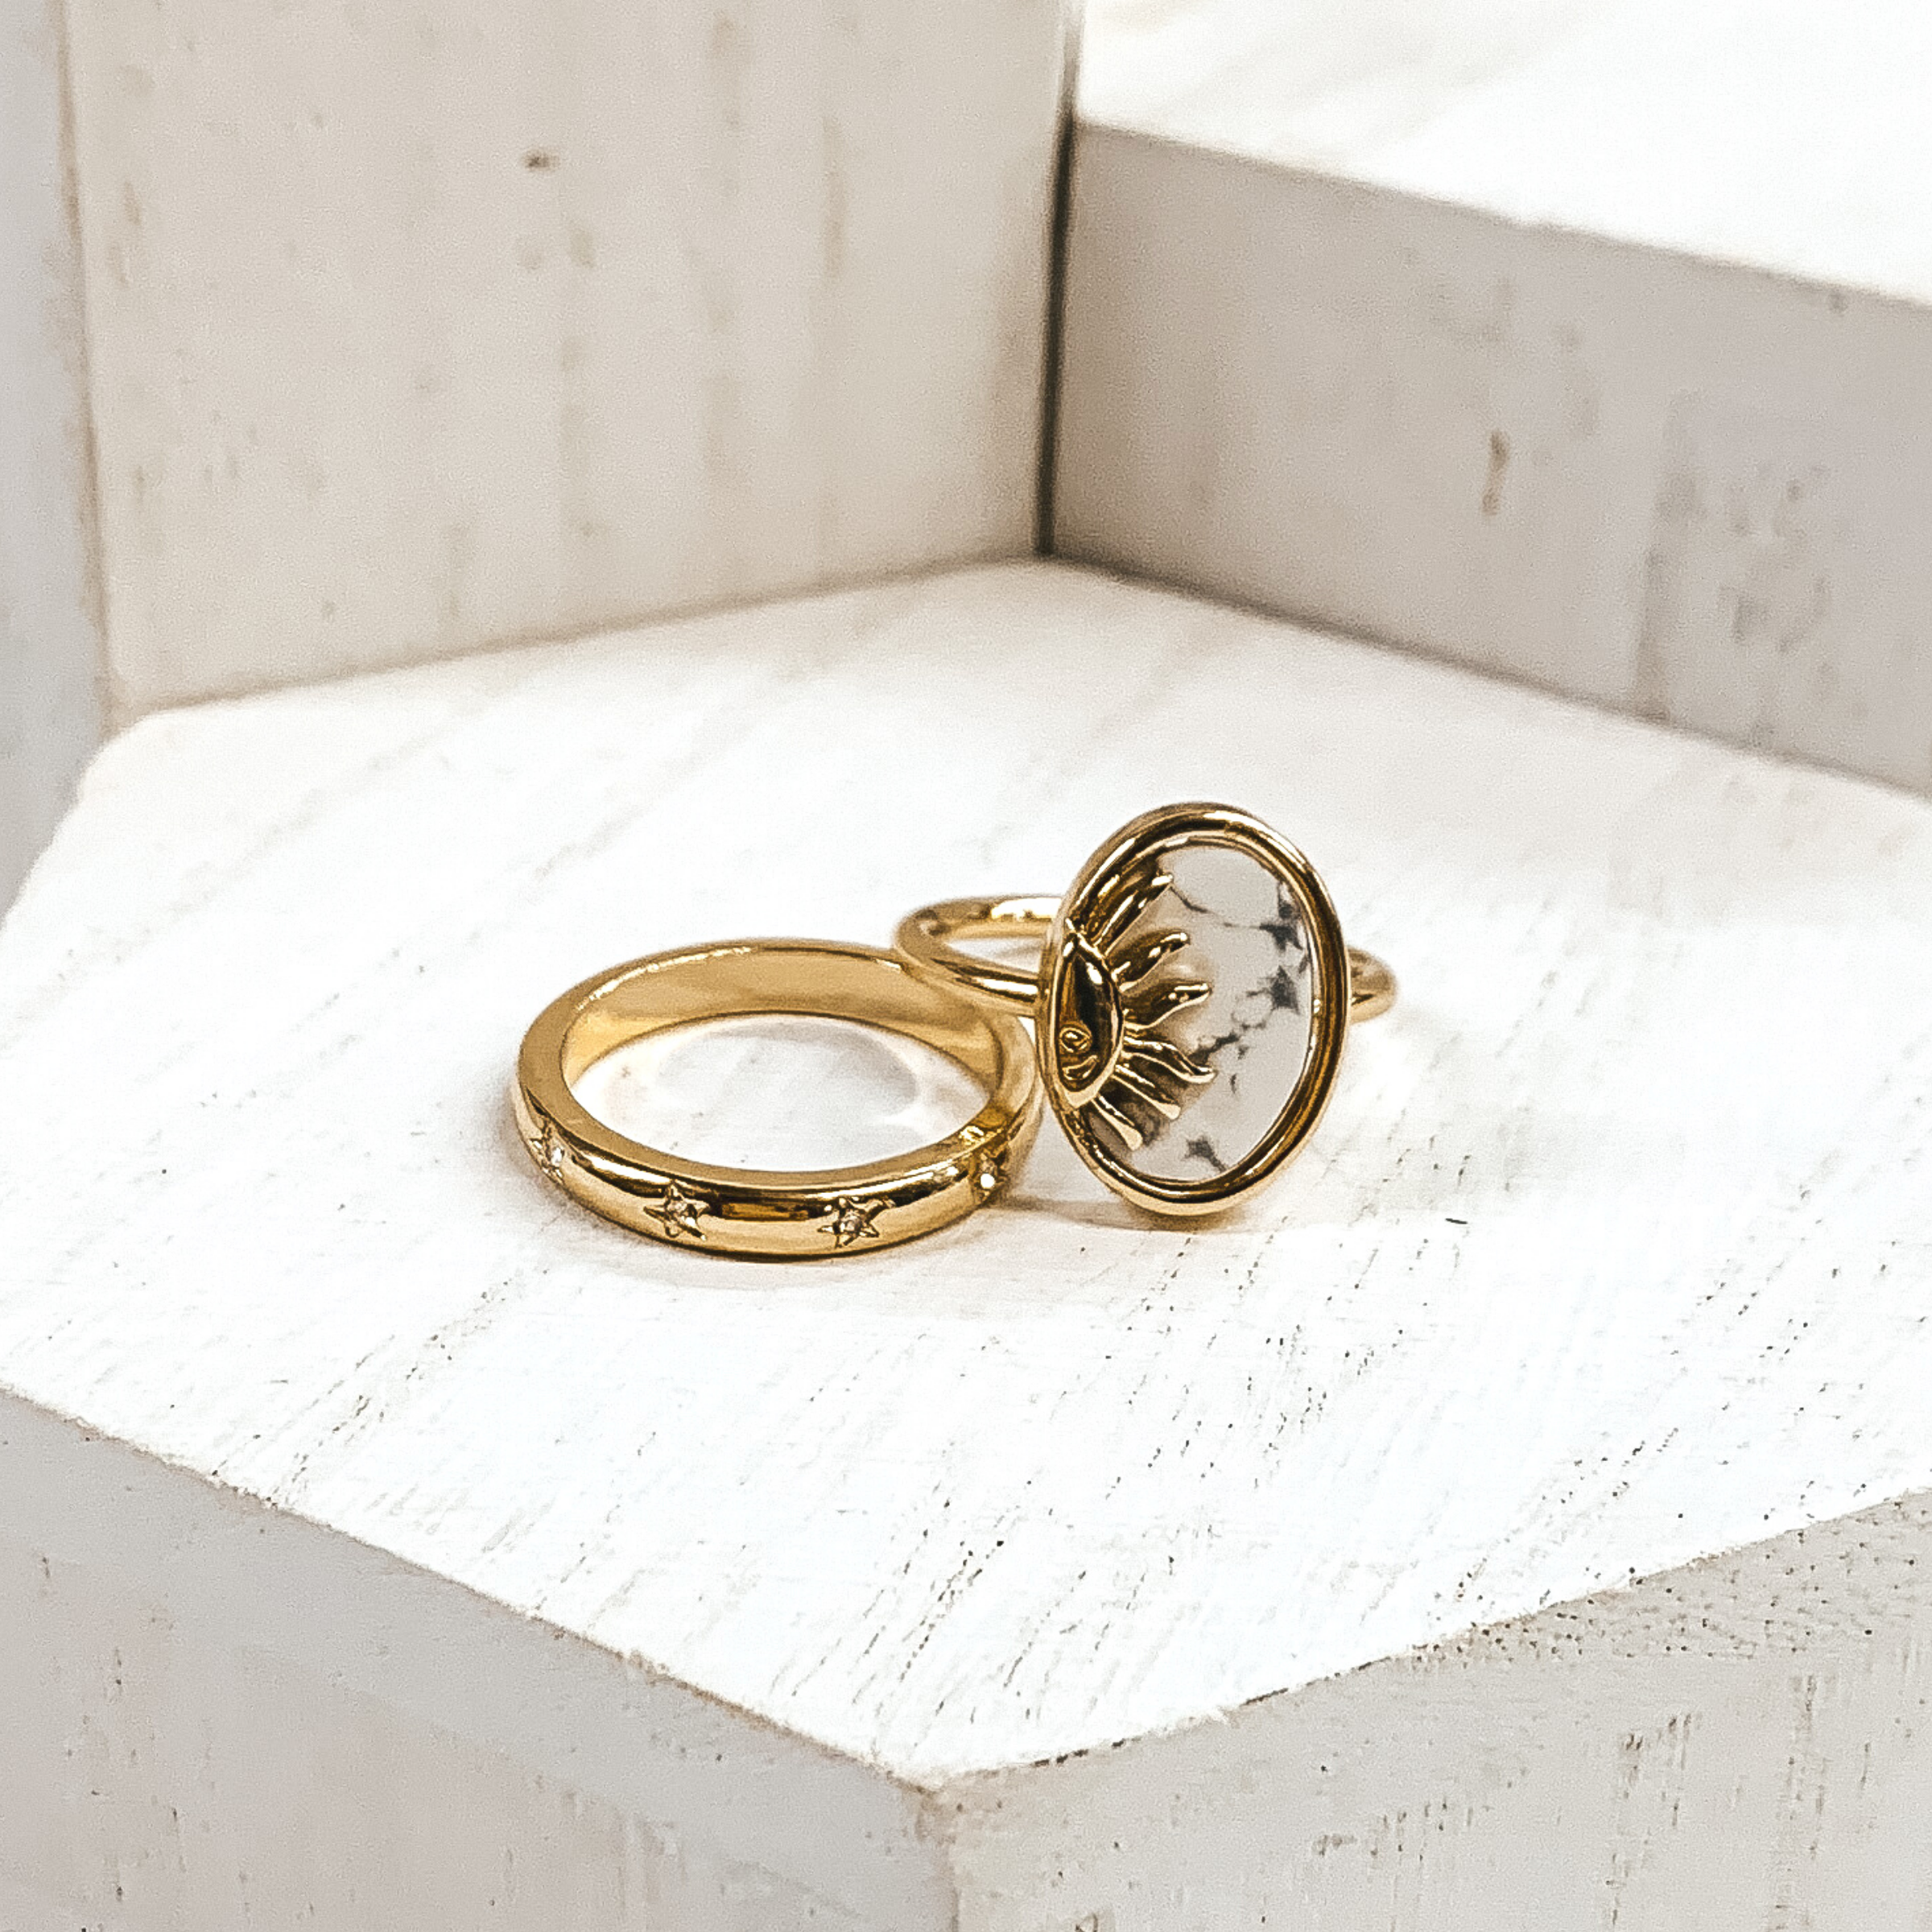 One ring is a plain gold band with tiny, engraved stars with tiny crystals in the center of the stars. The second rings id s plsin gold gand with an oval pendant. The oval pendant is a white stone pendant with a half sun gold charm. These rings are pictured on some white blocks.